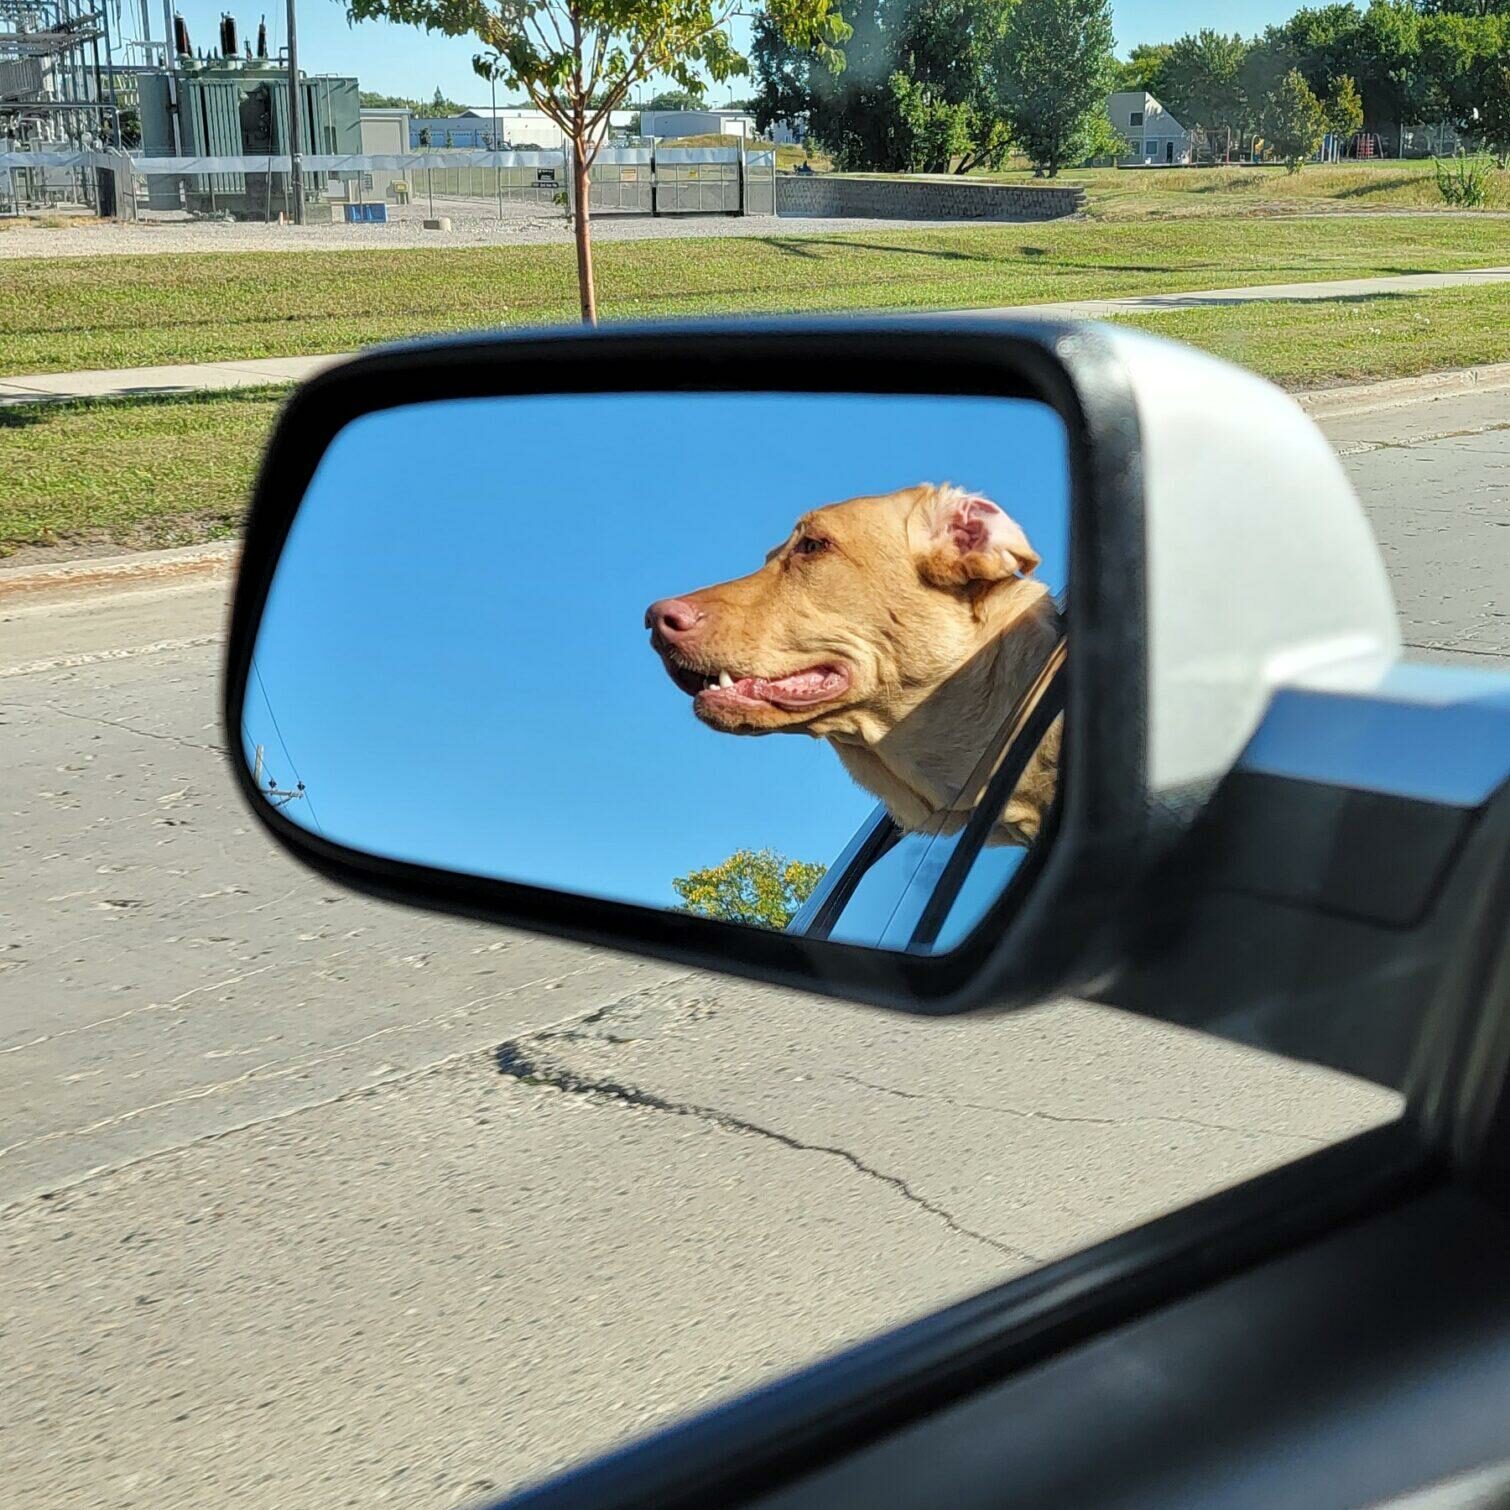 A golden dog has its head out the window of a car. The image is taken via the reflection in the car's sideview mirror.